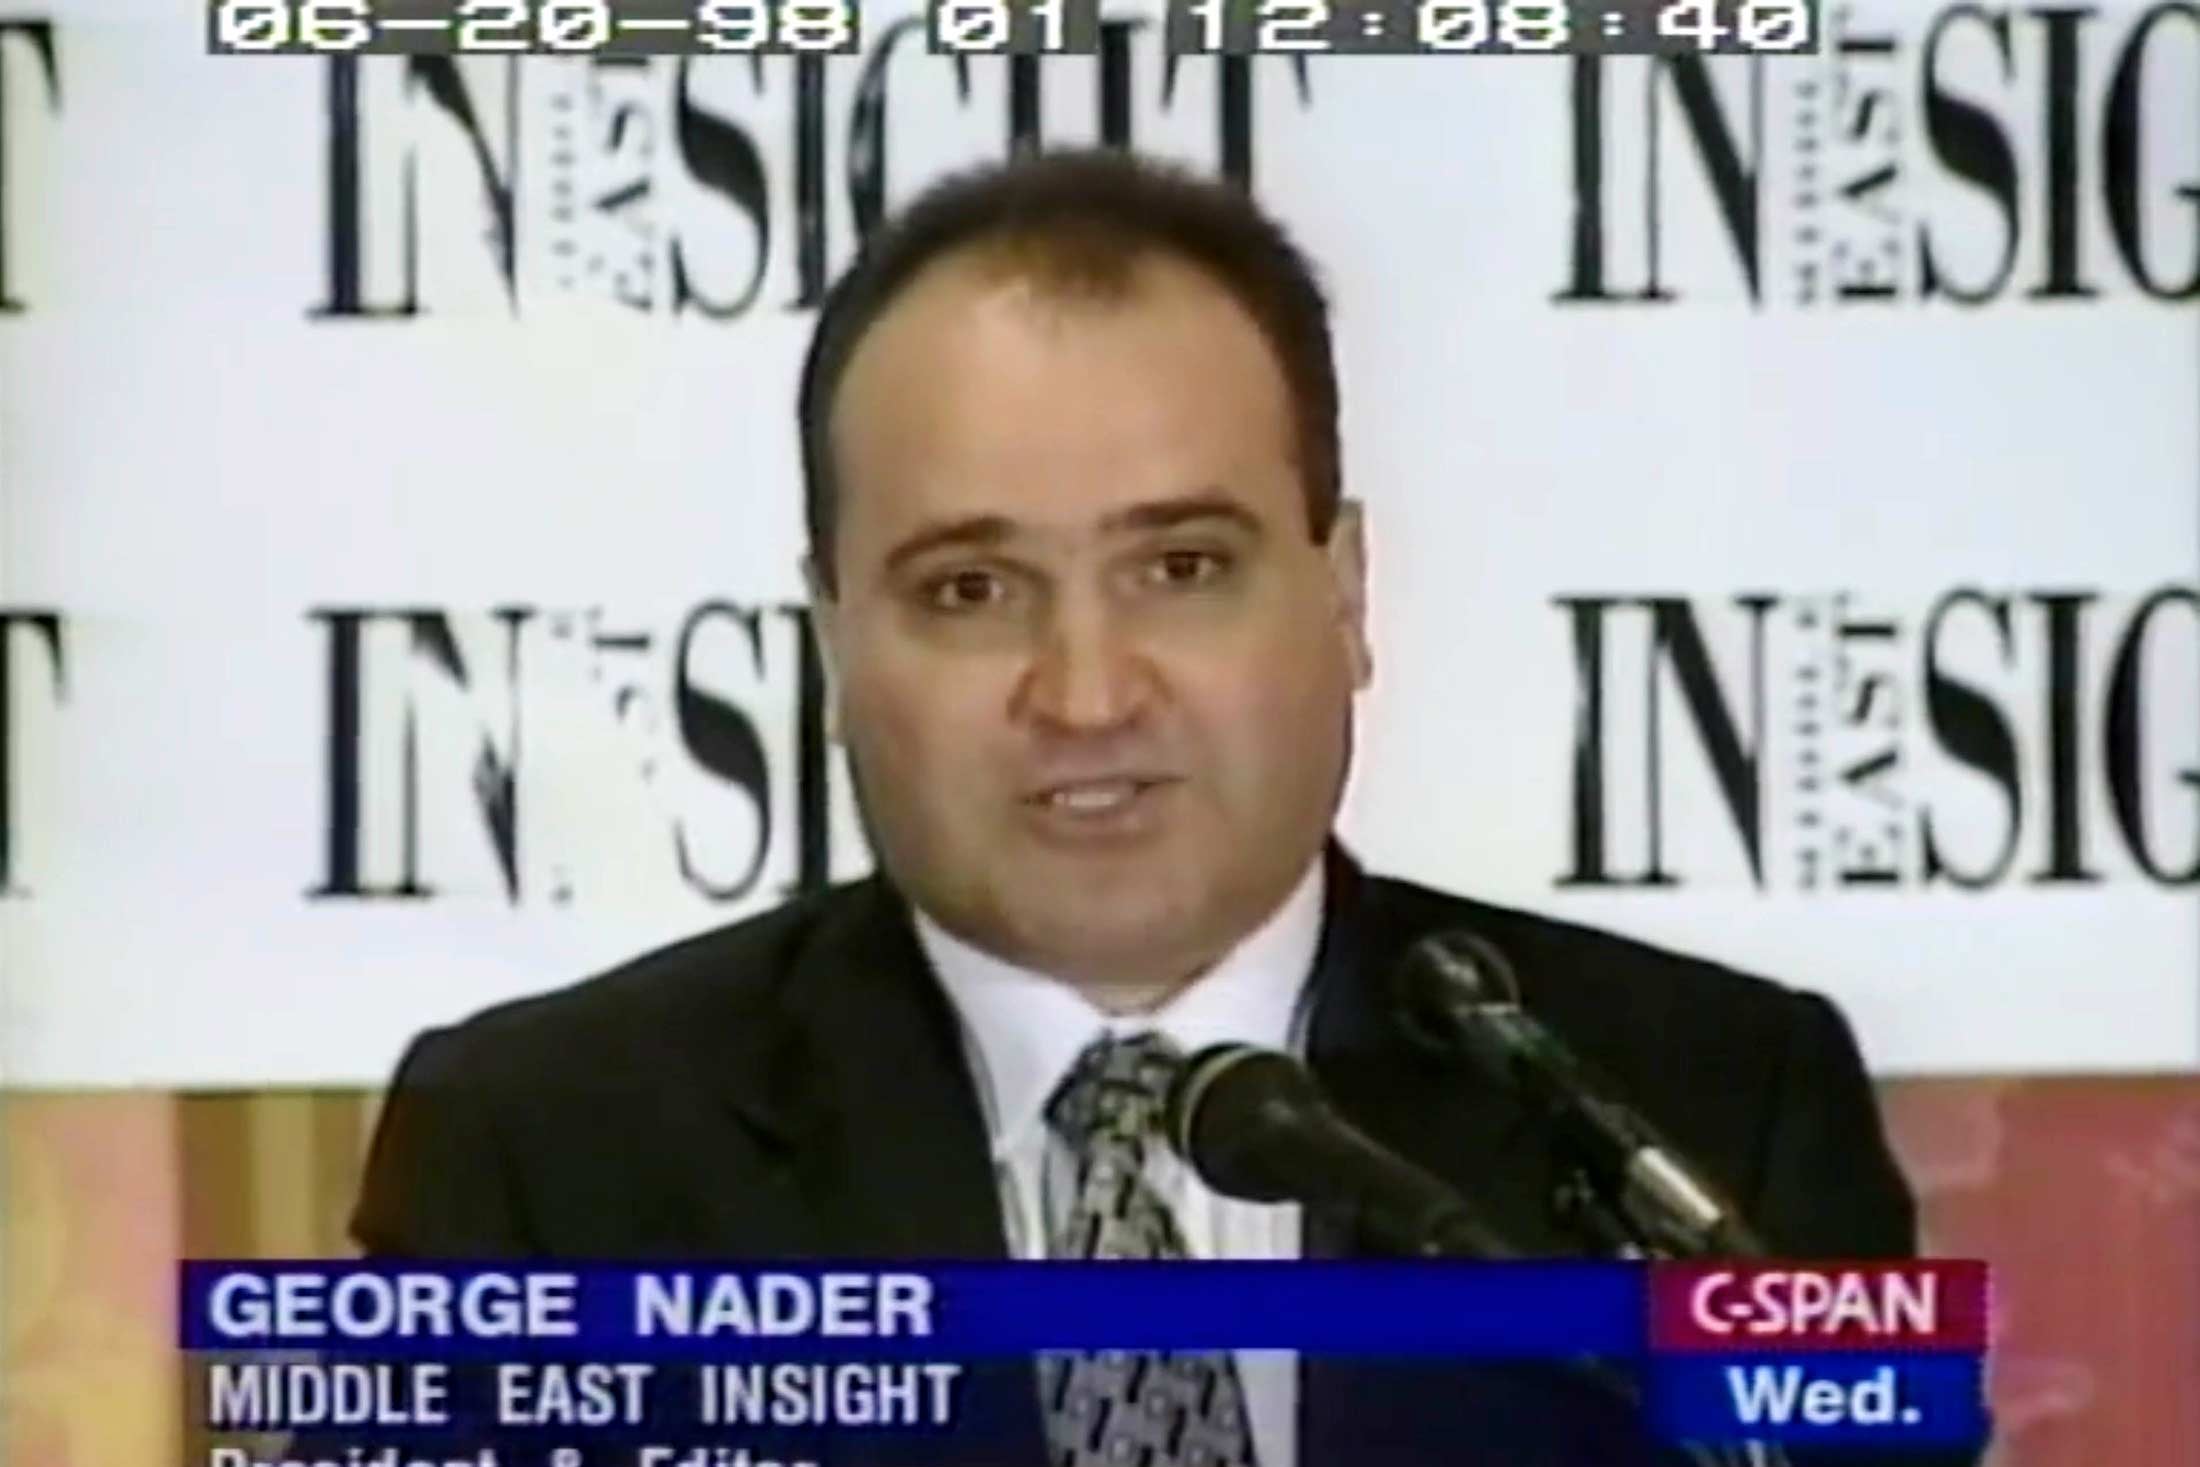 Nader, wearing a suit, speaks at a lectern